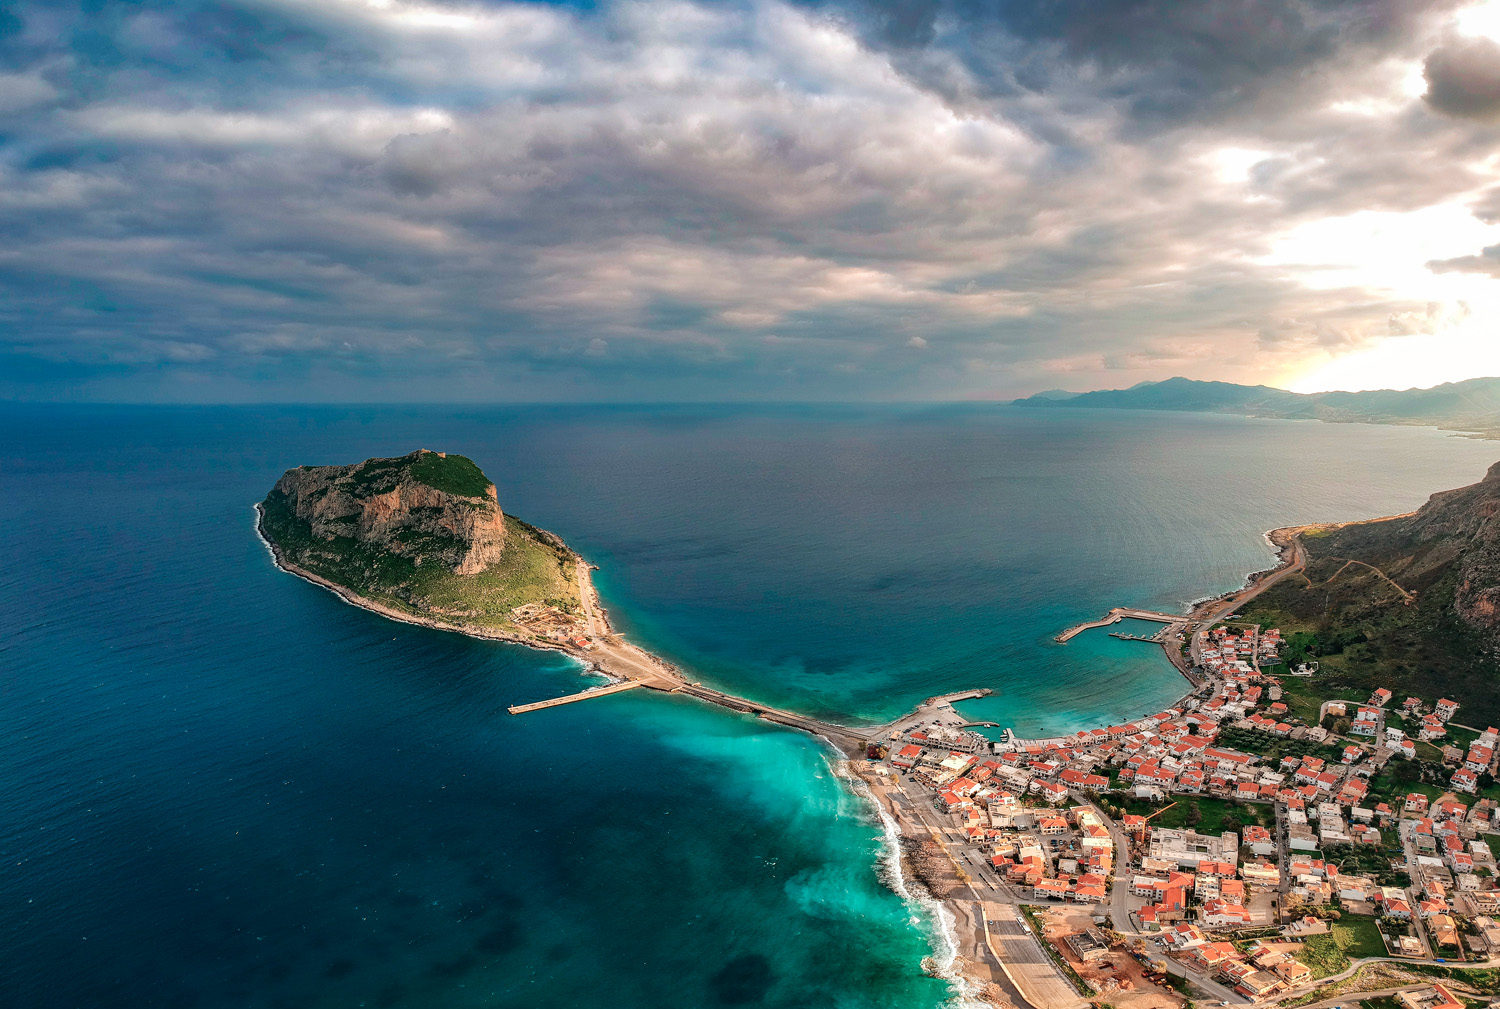 panoramic-view-of-the-ancient-hillside-town-of-monemvasia-in-the-southeastern-part-of-peloponnese-peninsula-medieval-fortified-castle-town-of-monemvasia-greece.jpg